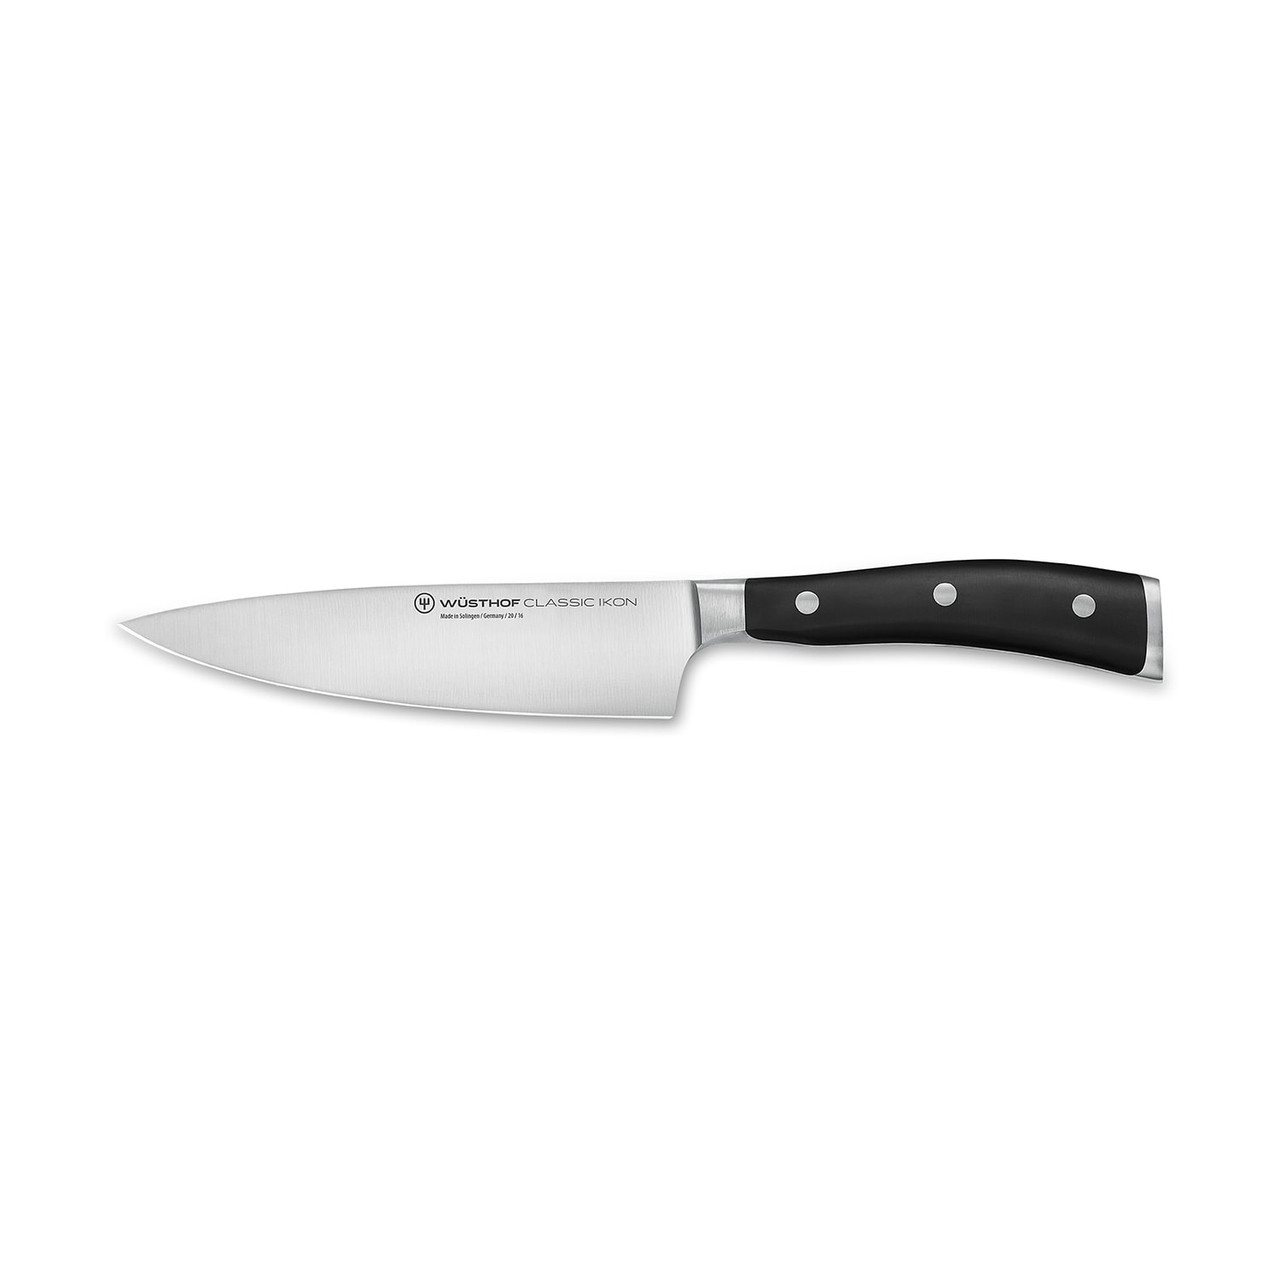 https://cdn11.bigcommerce.com/s-hccytny0od/images/stencil/1280x1280/products/1029/14760/wusthof-classic-ikon-chefs-knife-6in__26015.1619090969.jpg?c=2?imbypass=on